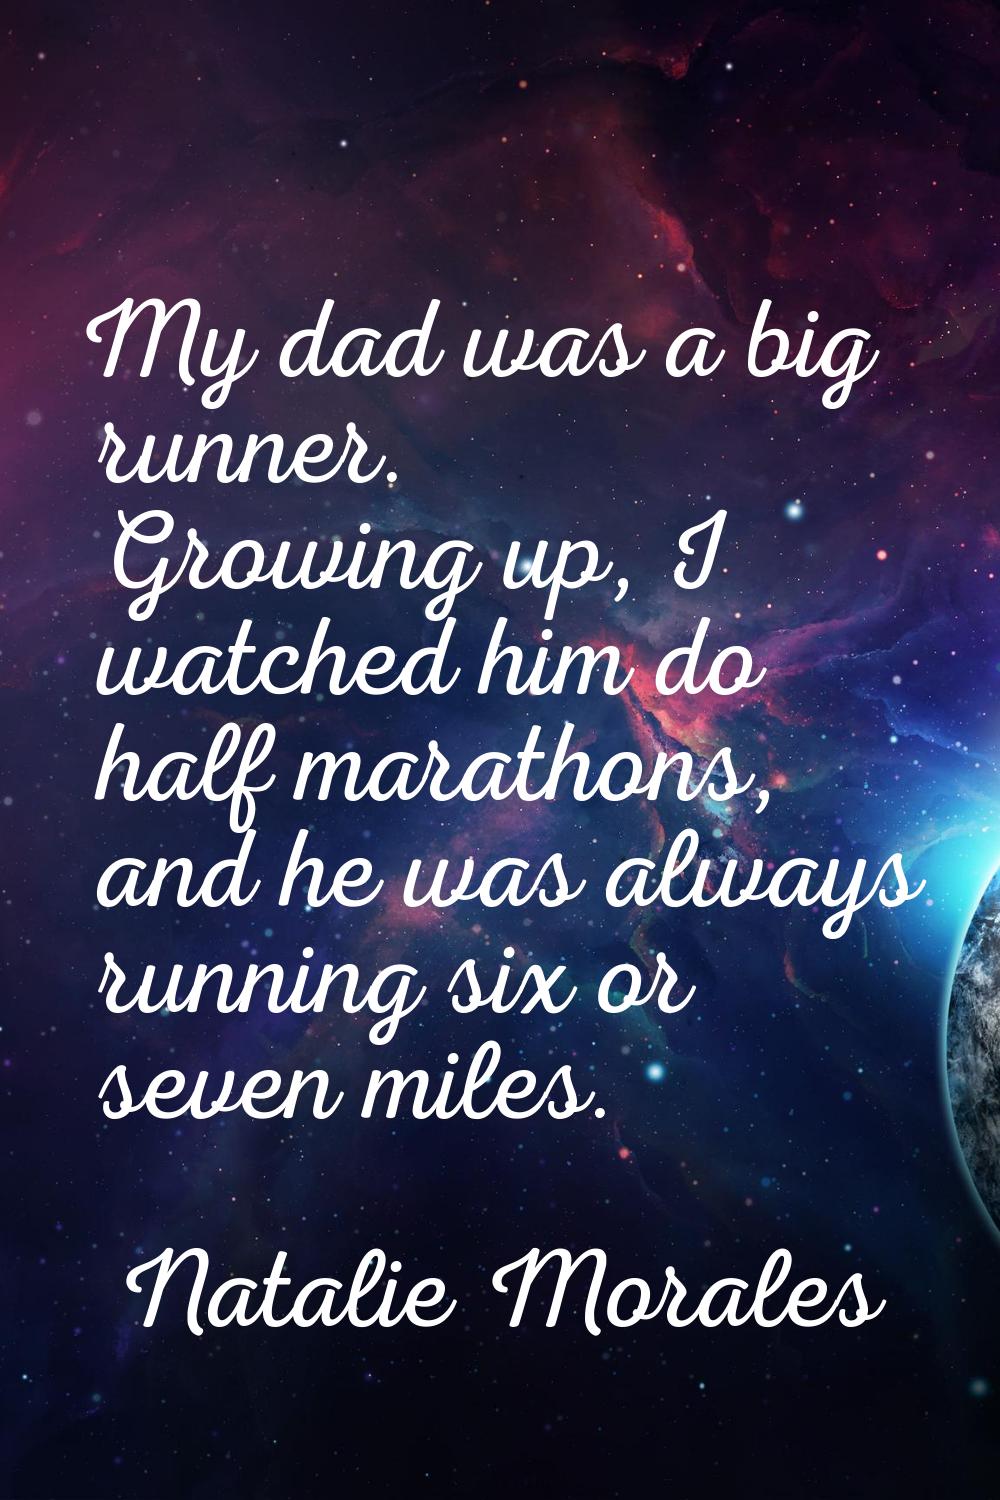 My dad was a big runner. Growing up, I watched him do half marathons, and he was always running six